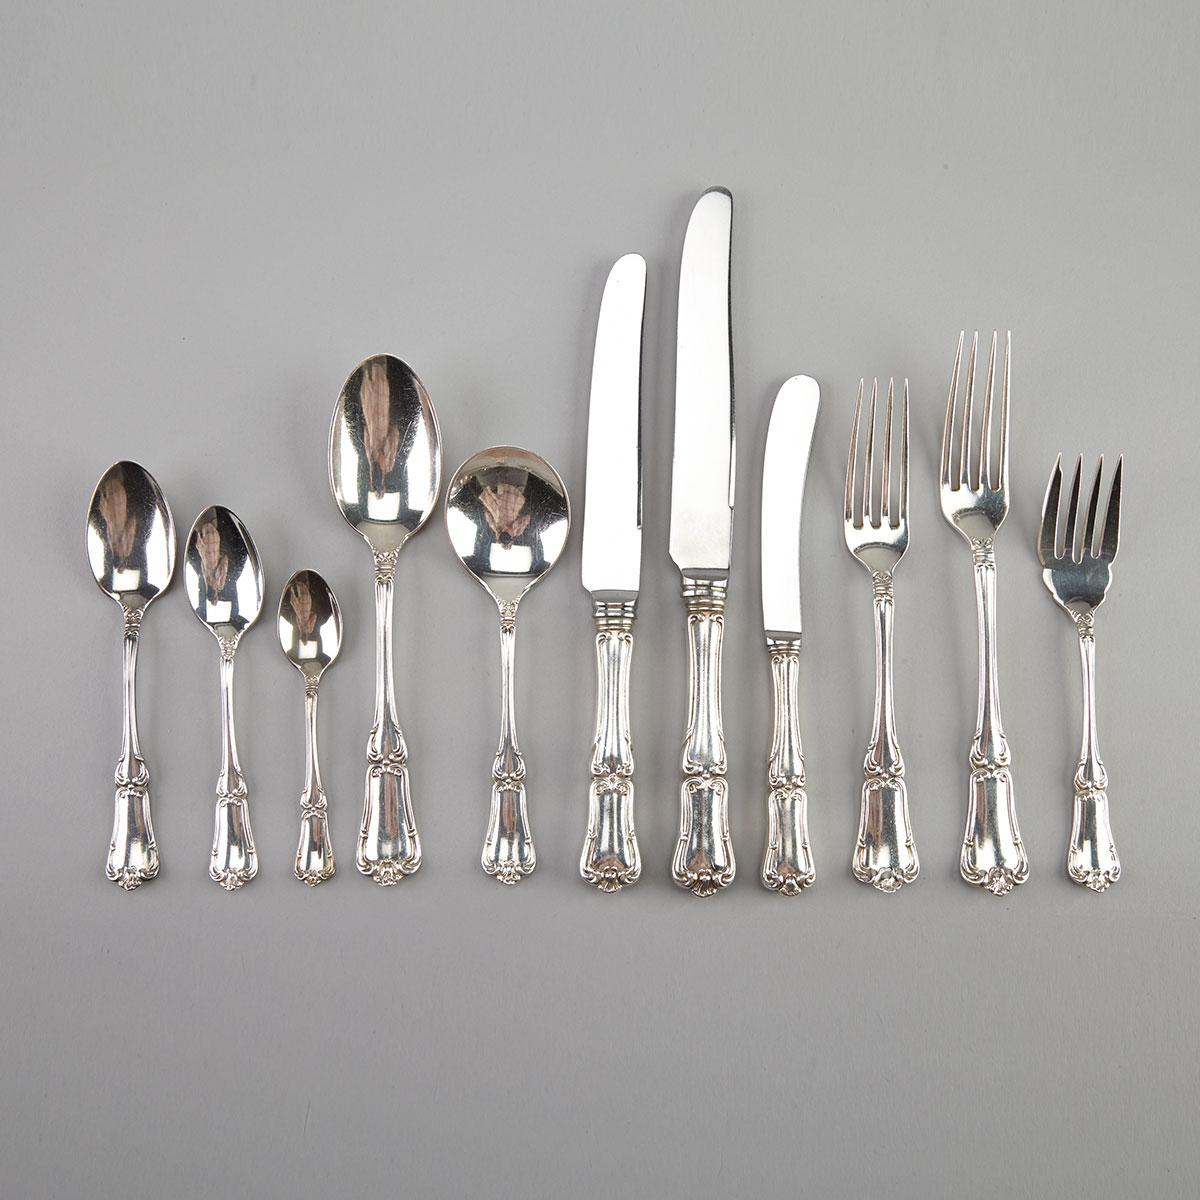 Canadian Silver ‘Francis I’ Pattern Flatware Service, Henry Birks & Sons, Montreal, Que., 20th century